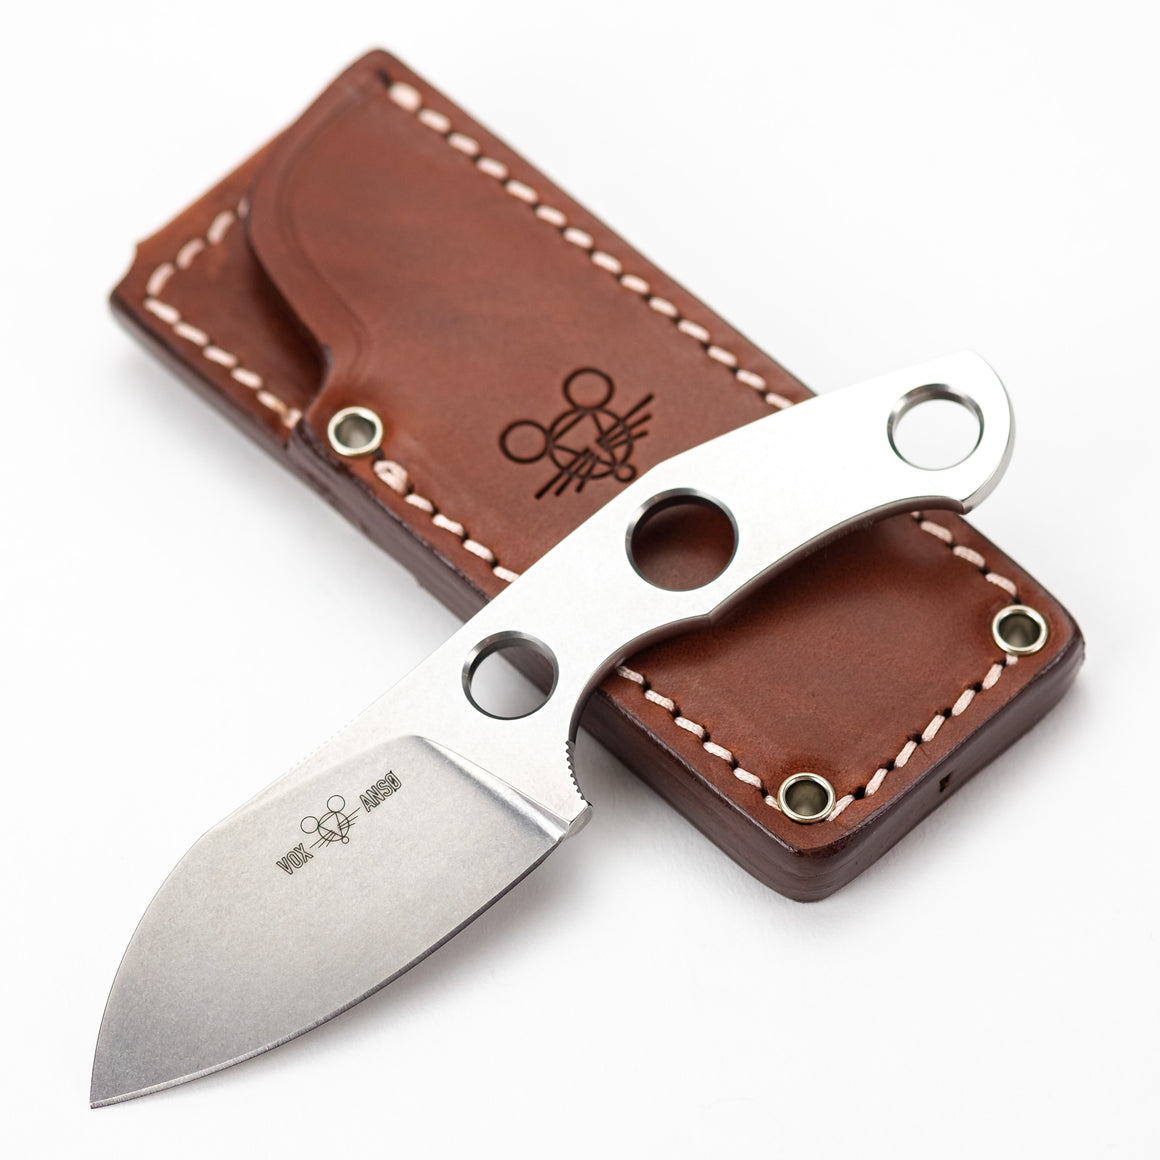 GiantMouse GMF1 - Cobalt high performance steel - Handcrafted in Italy